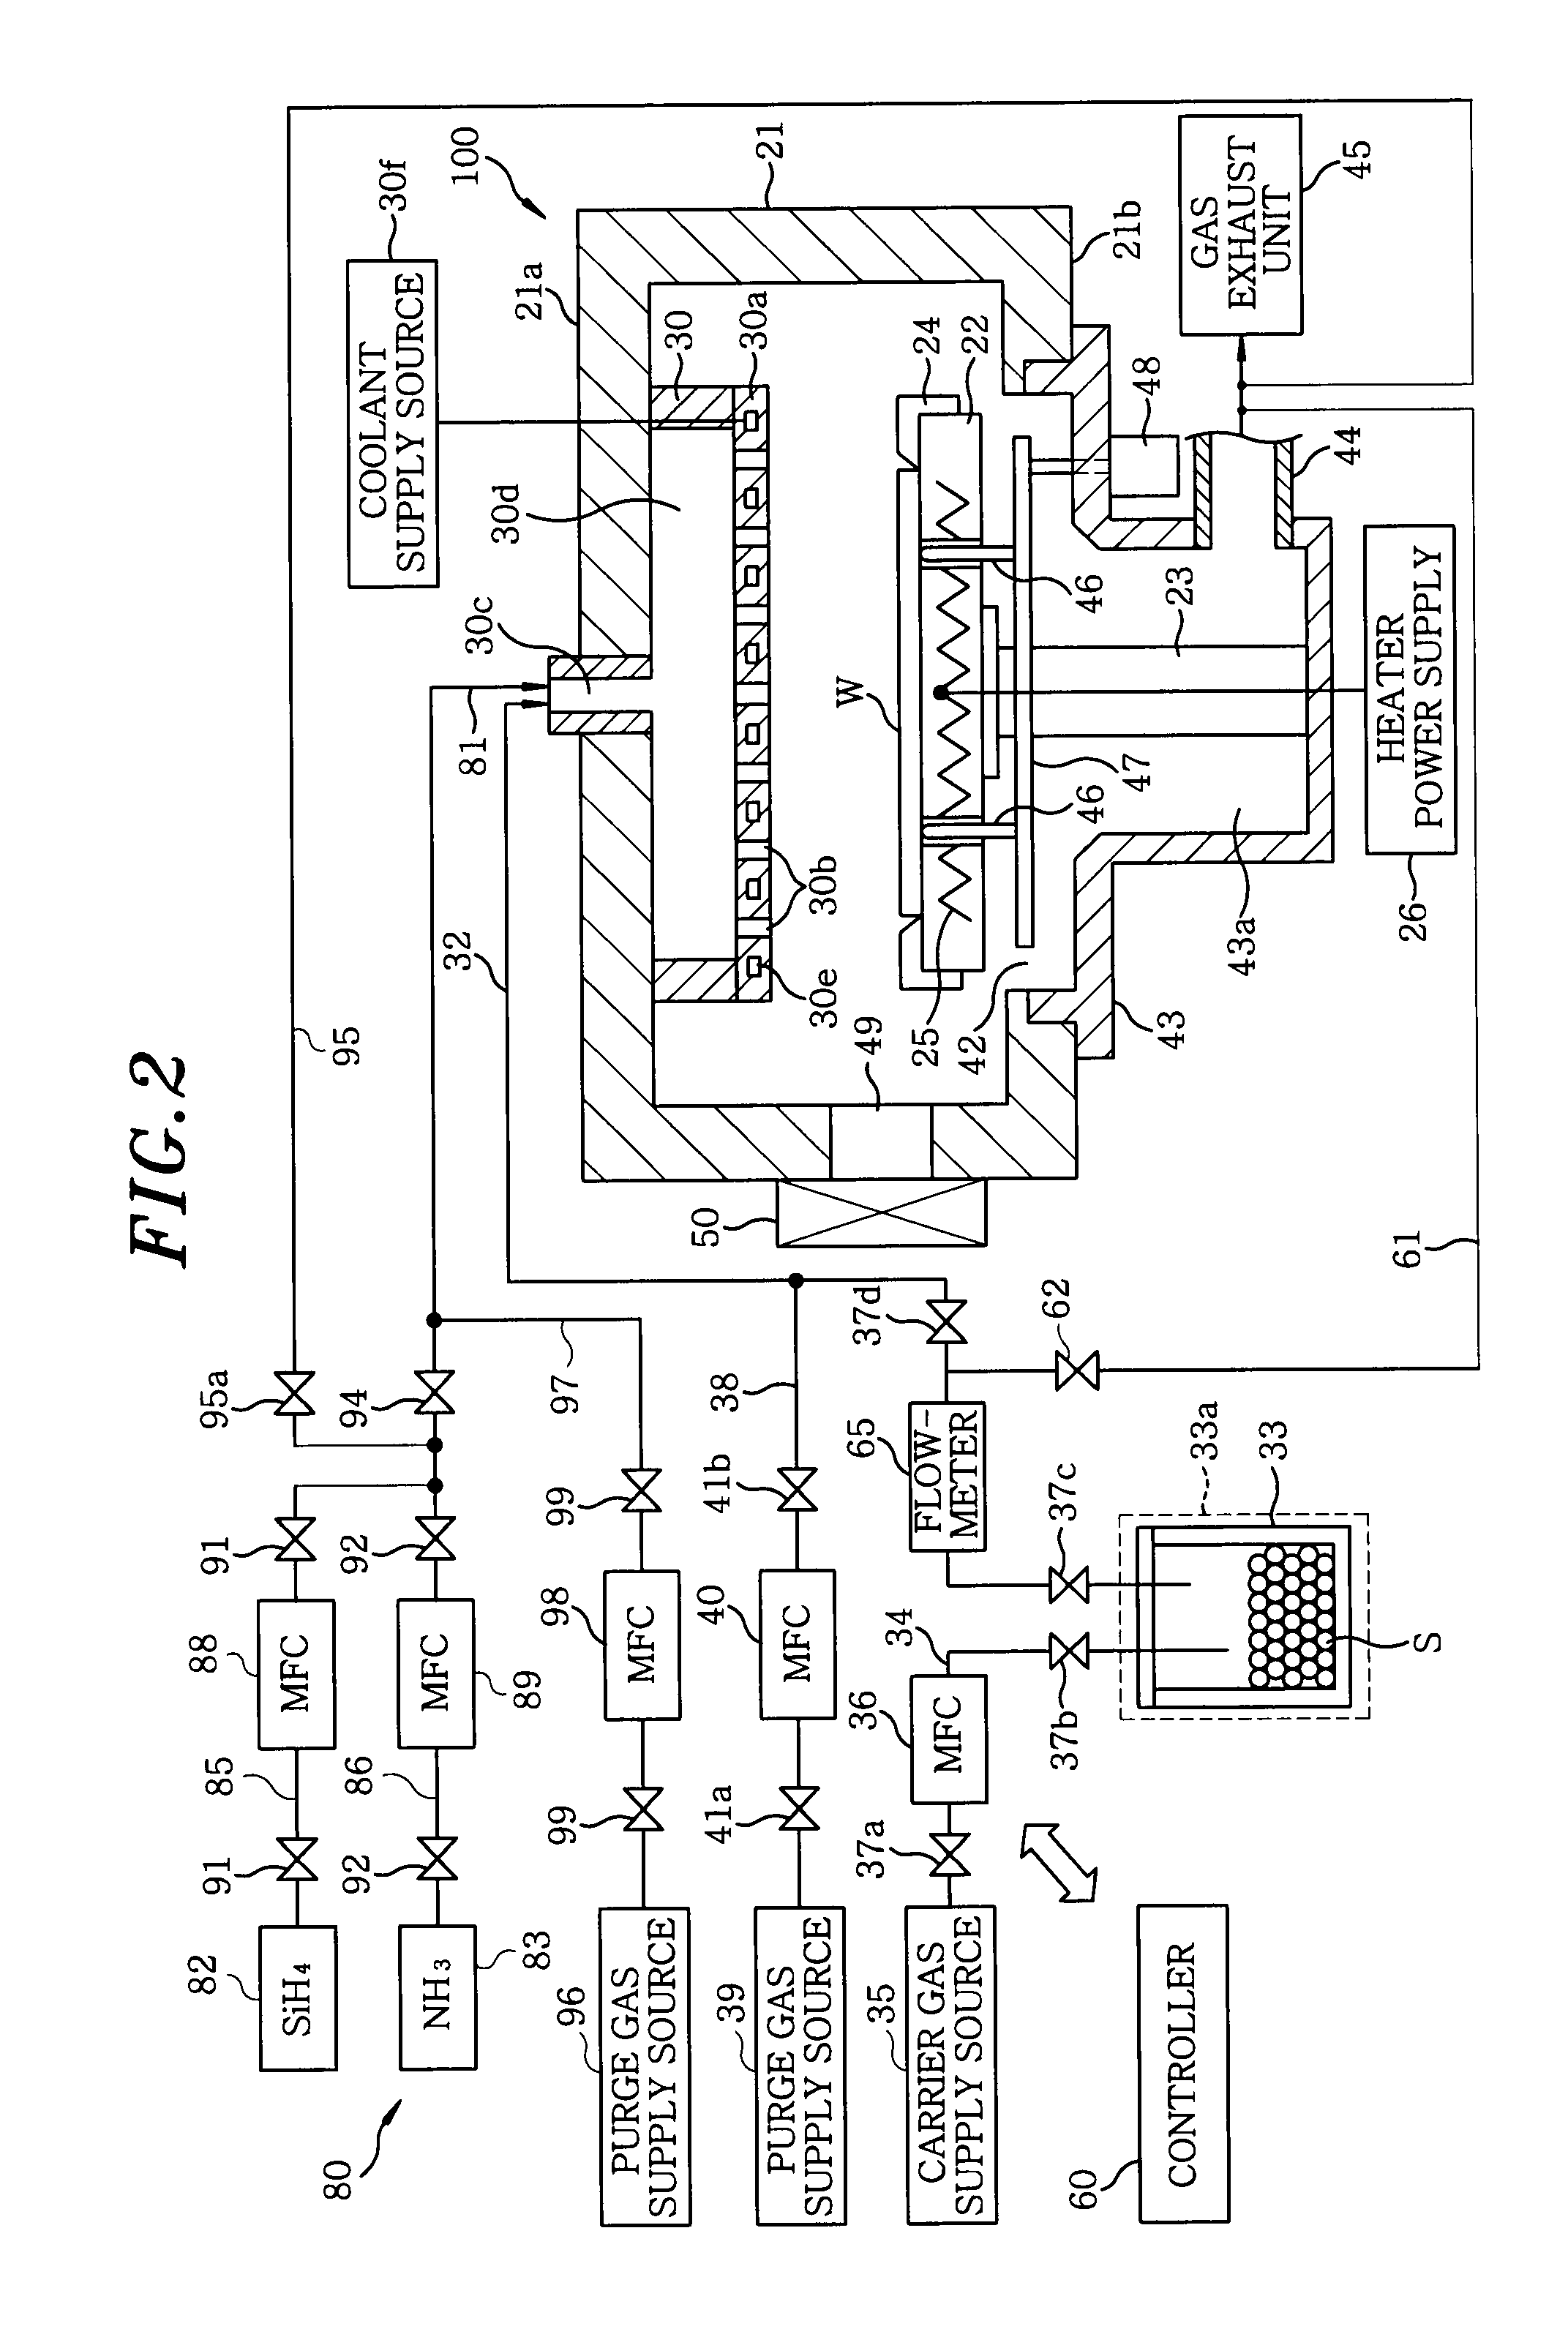 Metal film decarbonizing method, film forming method and semiconductor device manufacturing method